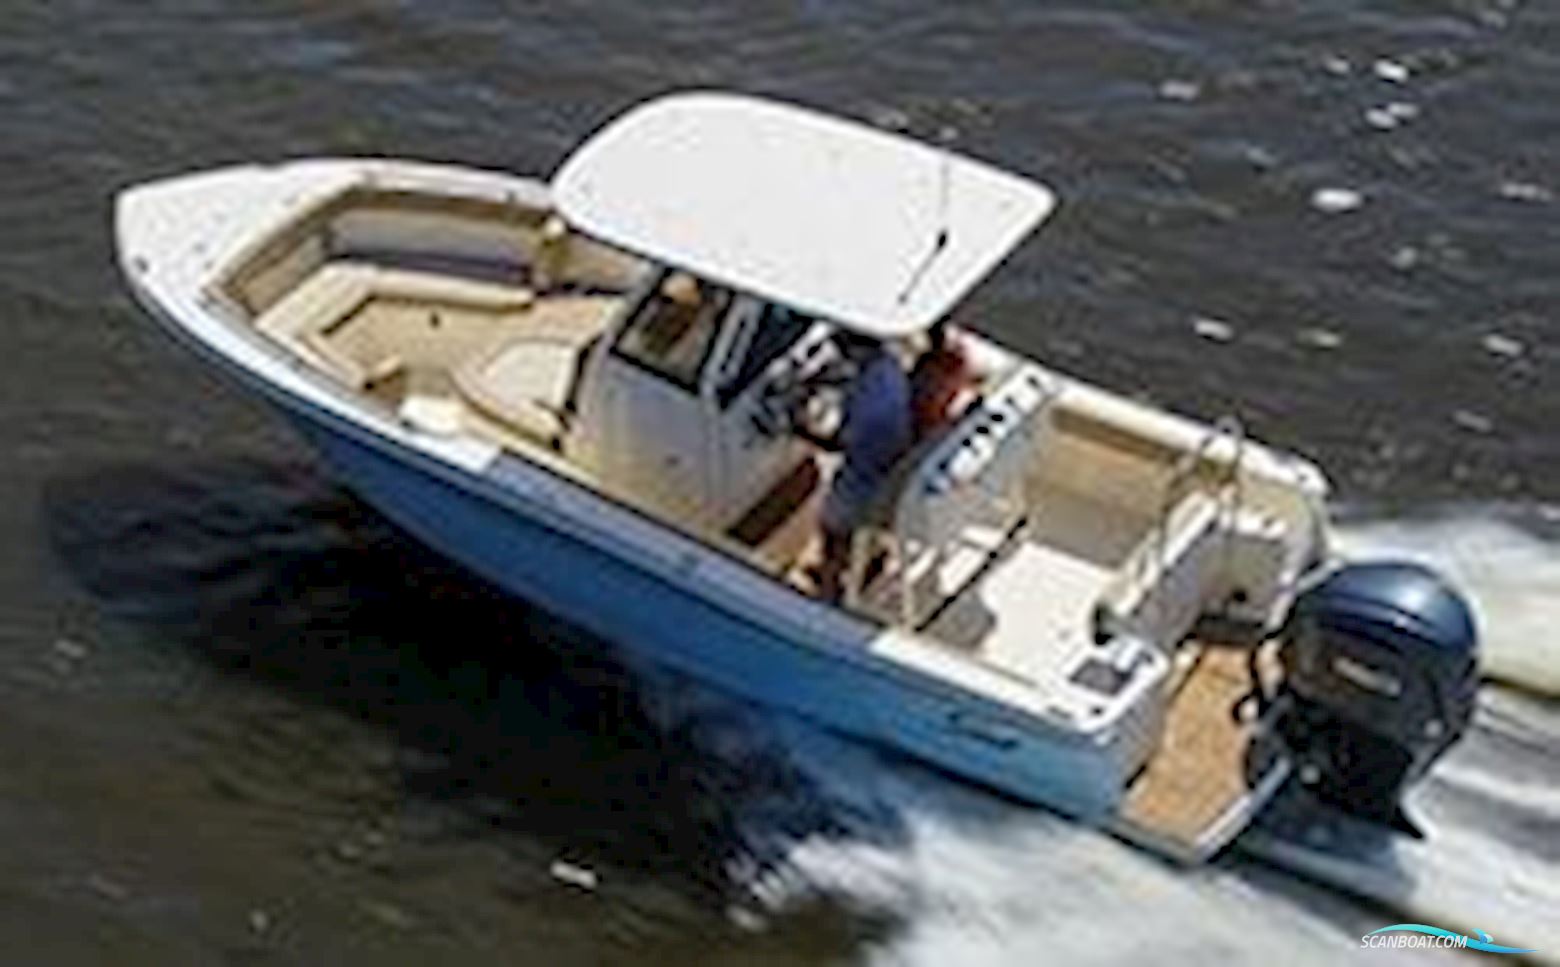 Scout 240 Xsf Motor boat 2020, with Scout engine, The Netherlands